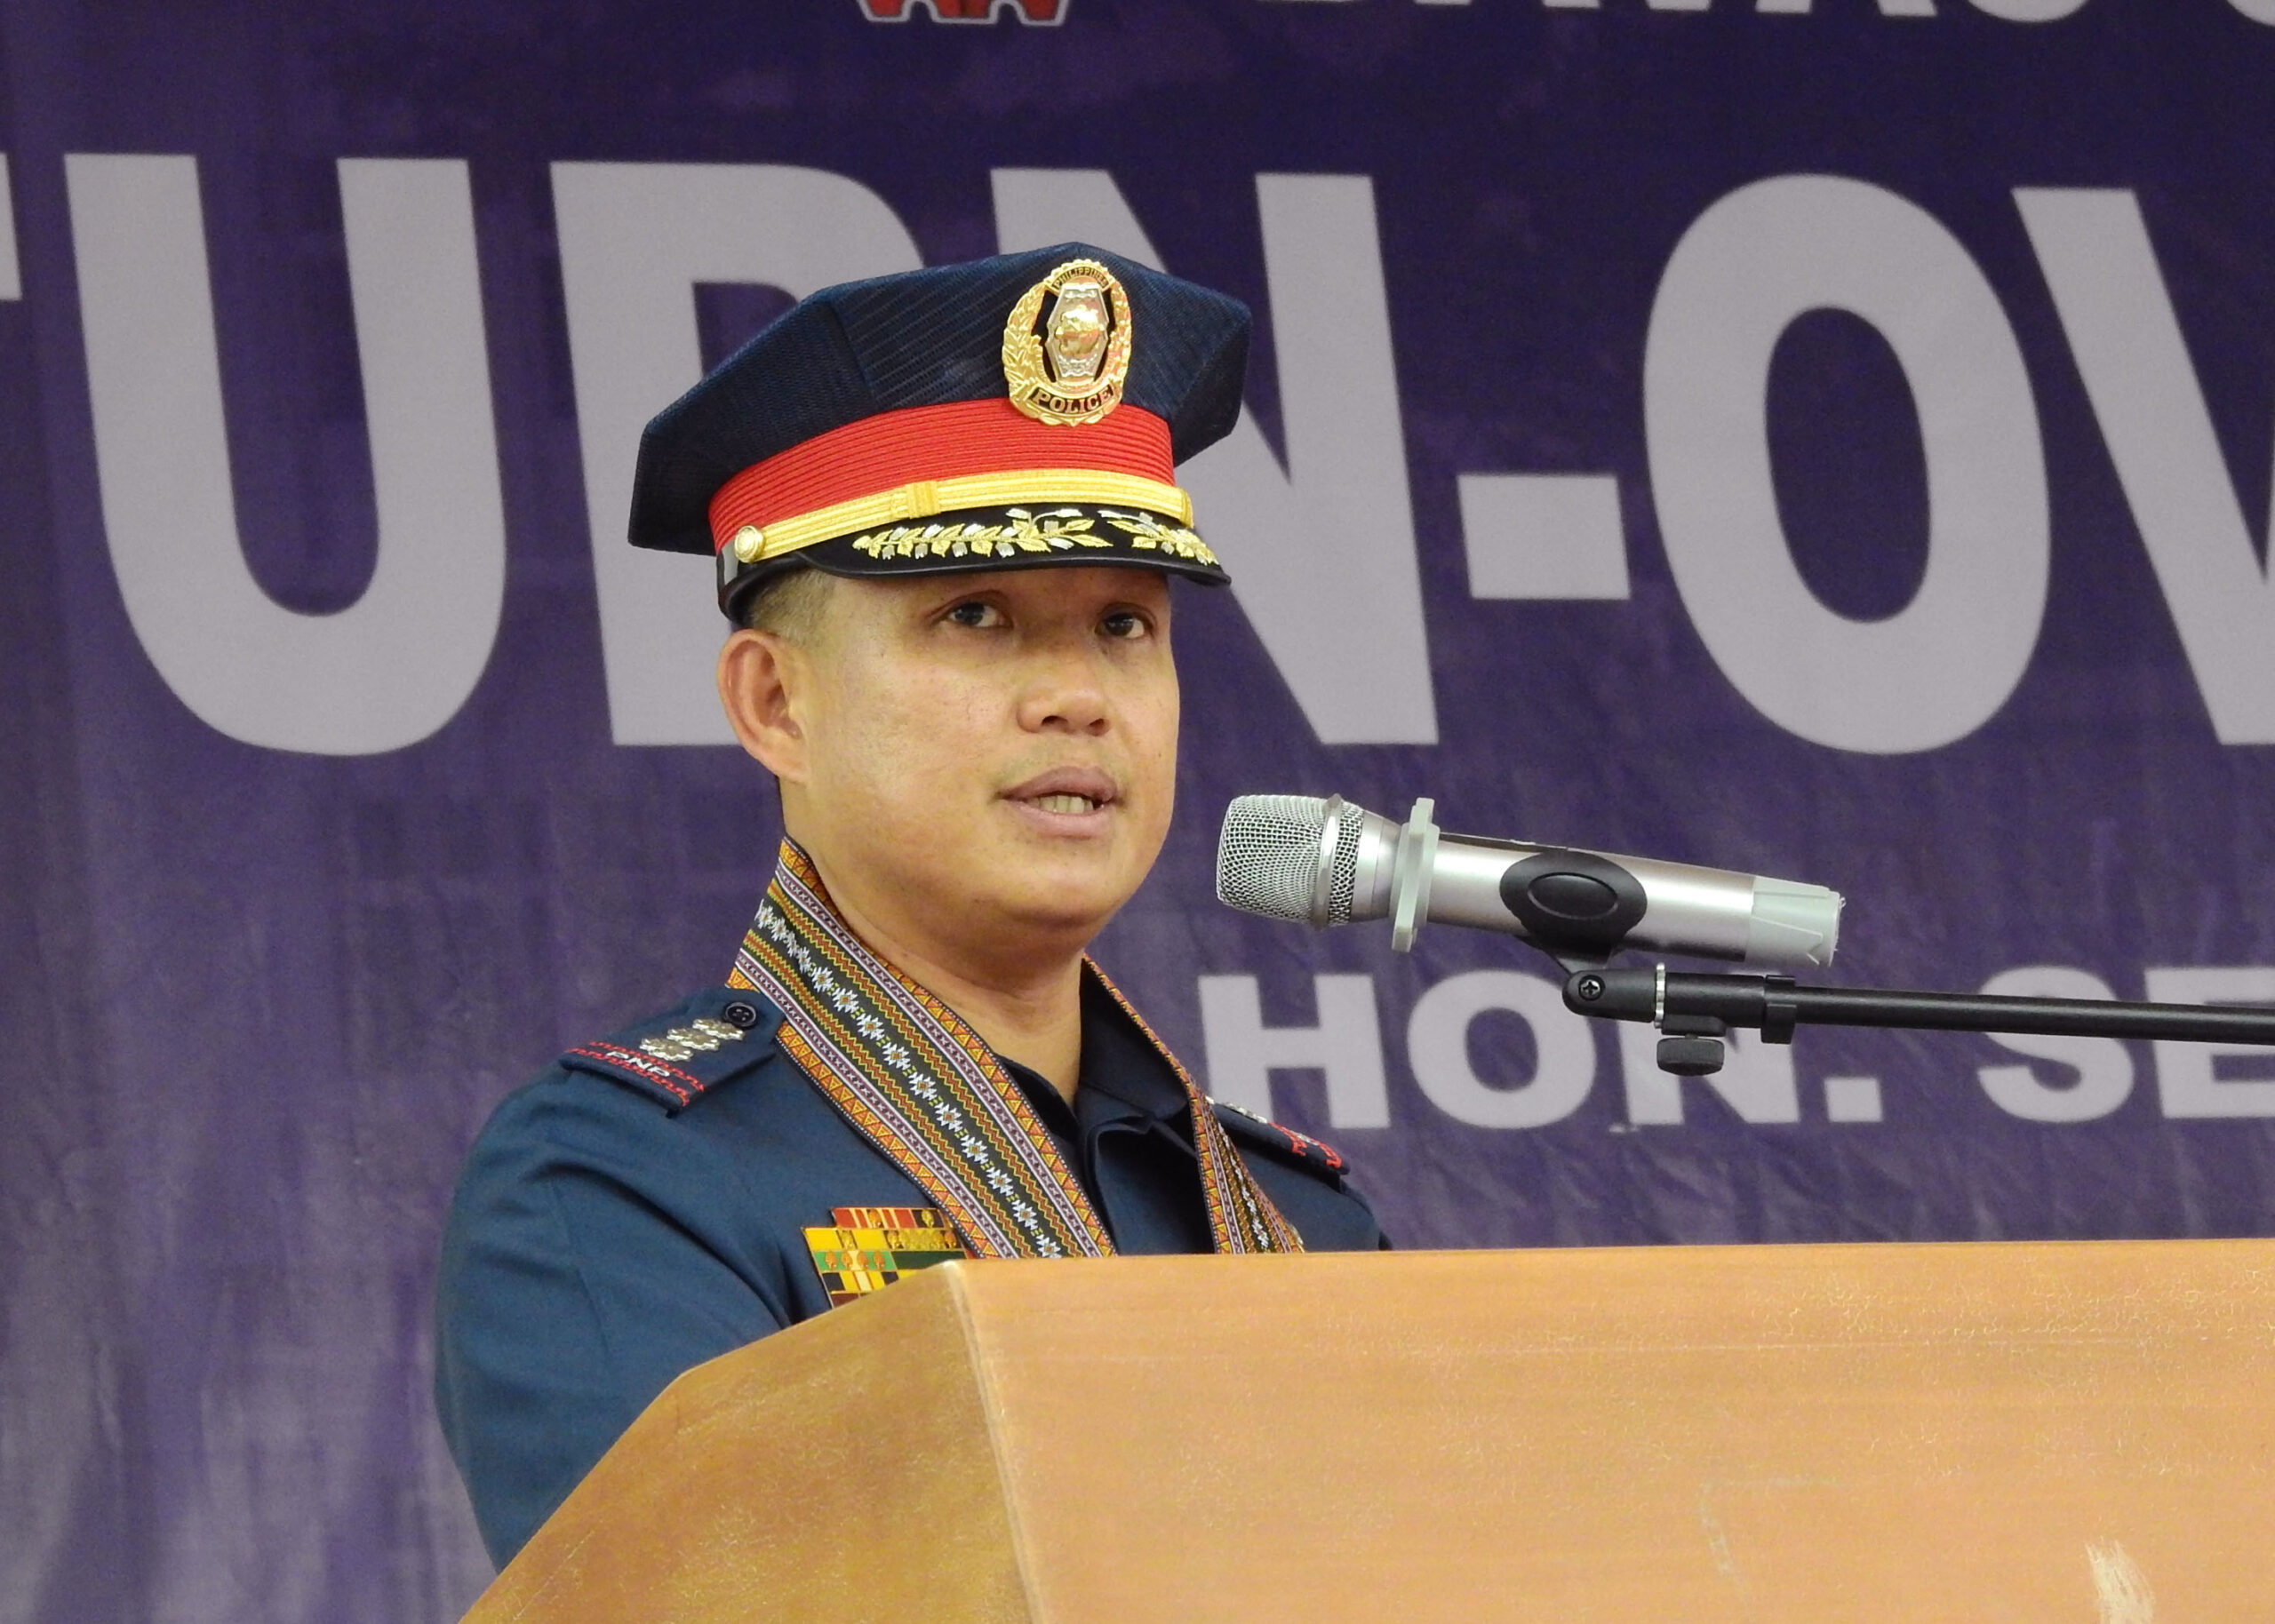 Col. Richard Bad-ang has assumed as the new chief of the Davao City Police Office